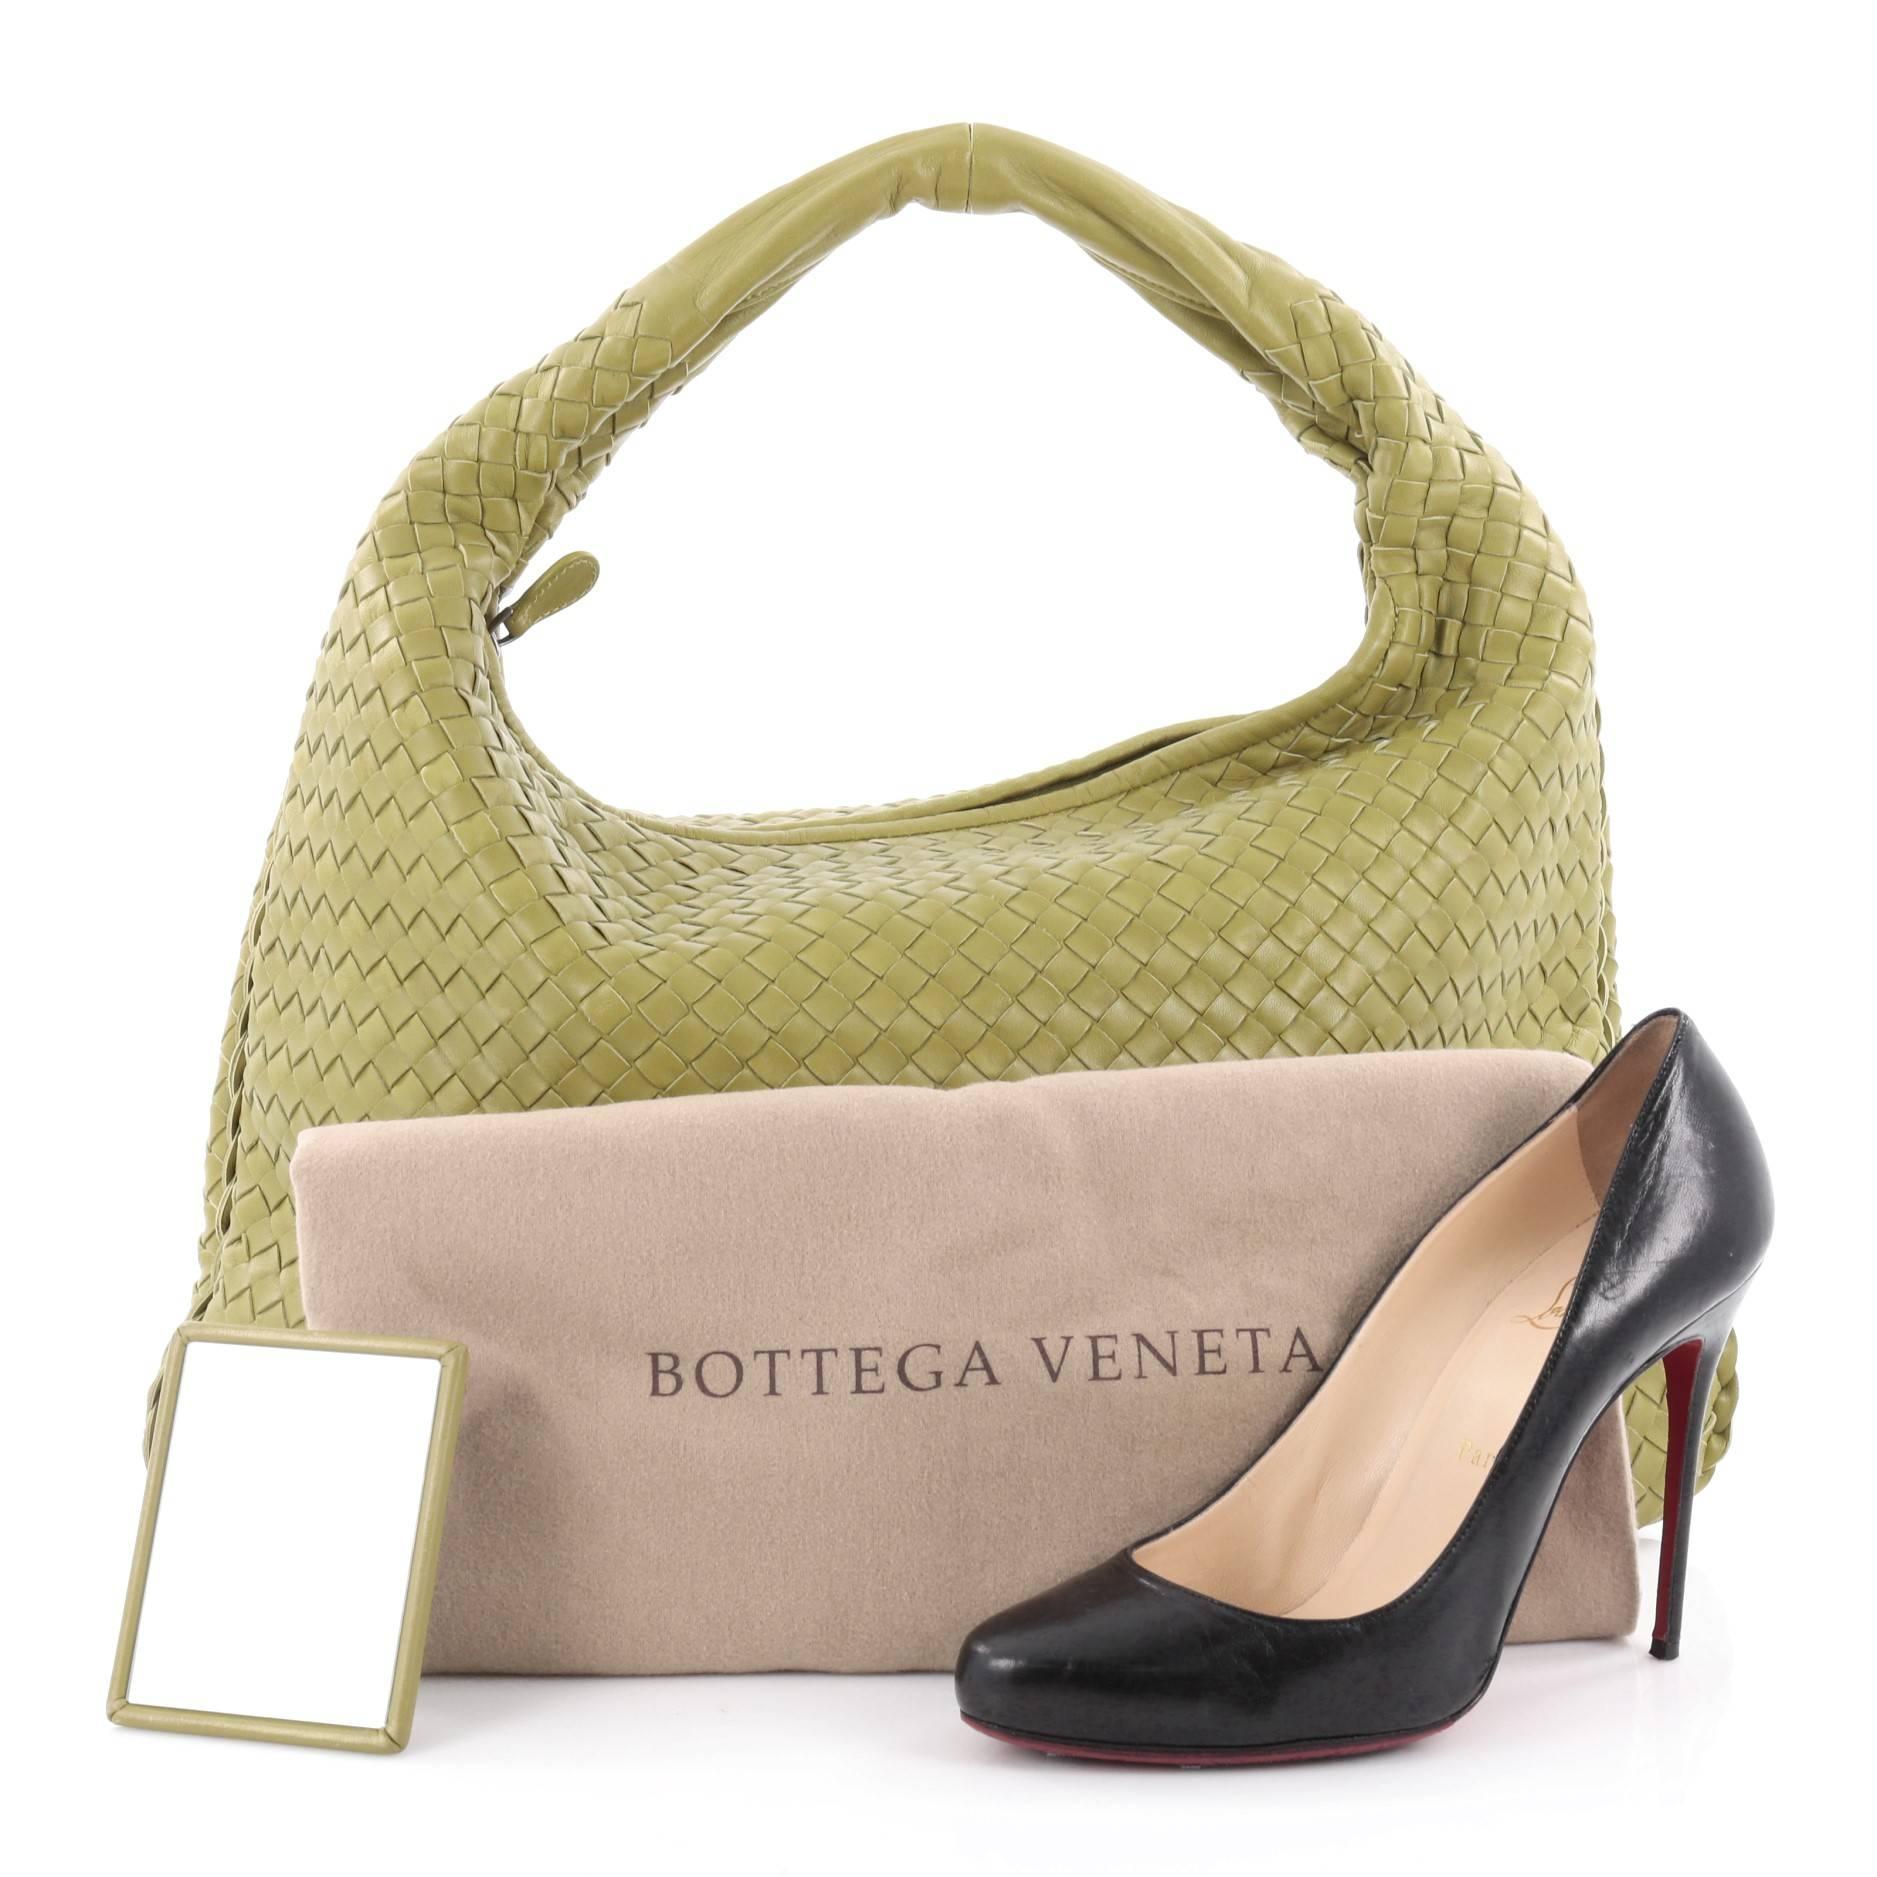 This authentic Bottega Veneta Veneta Hobo Intrecciato Nappa Large is a timelessly elegant bag with a casual silhouette. Excellently crafted from green nappa leather woven in Bottega Veneta's signature intrecciato method, this no-fuss hobo features a